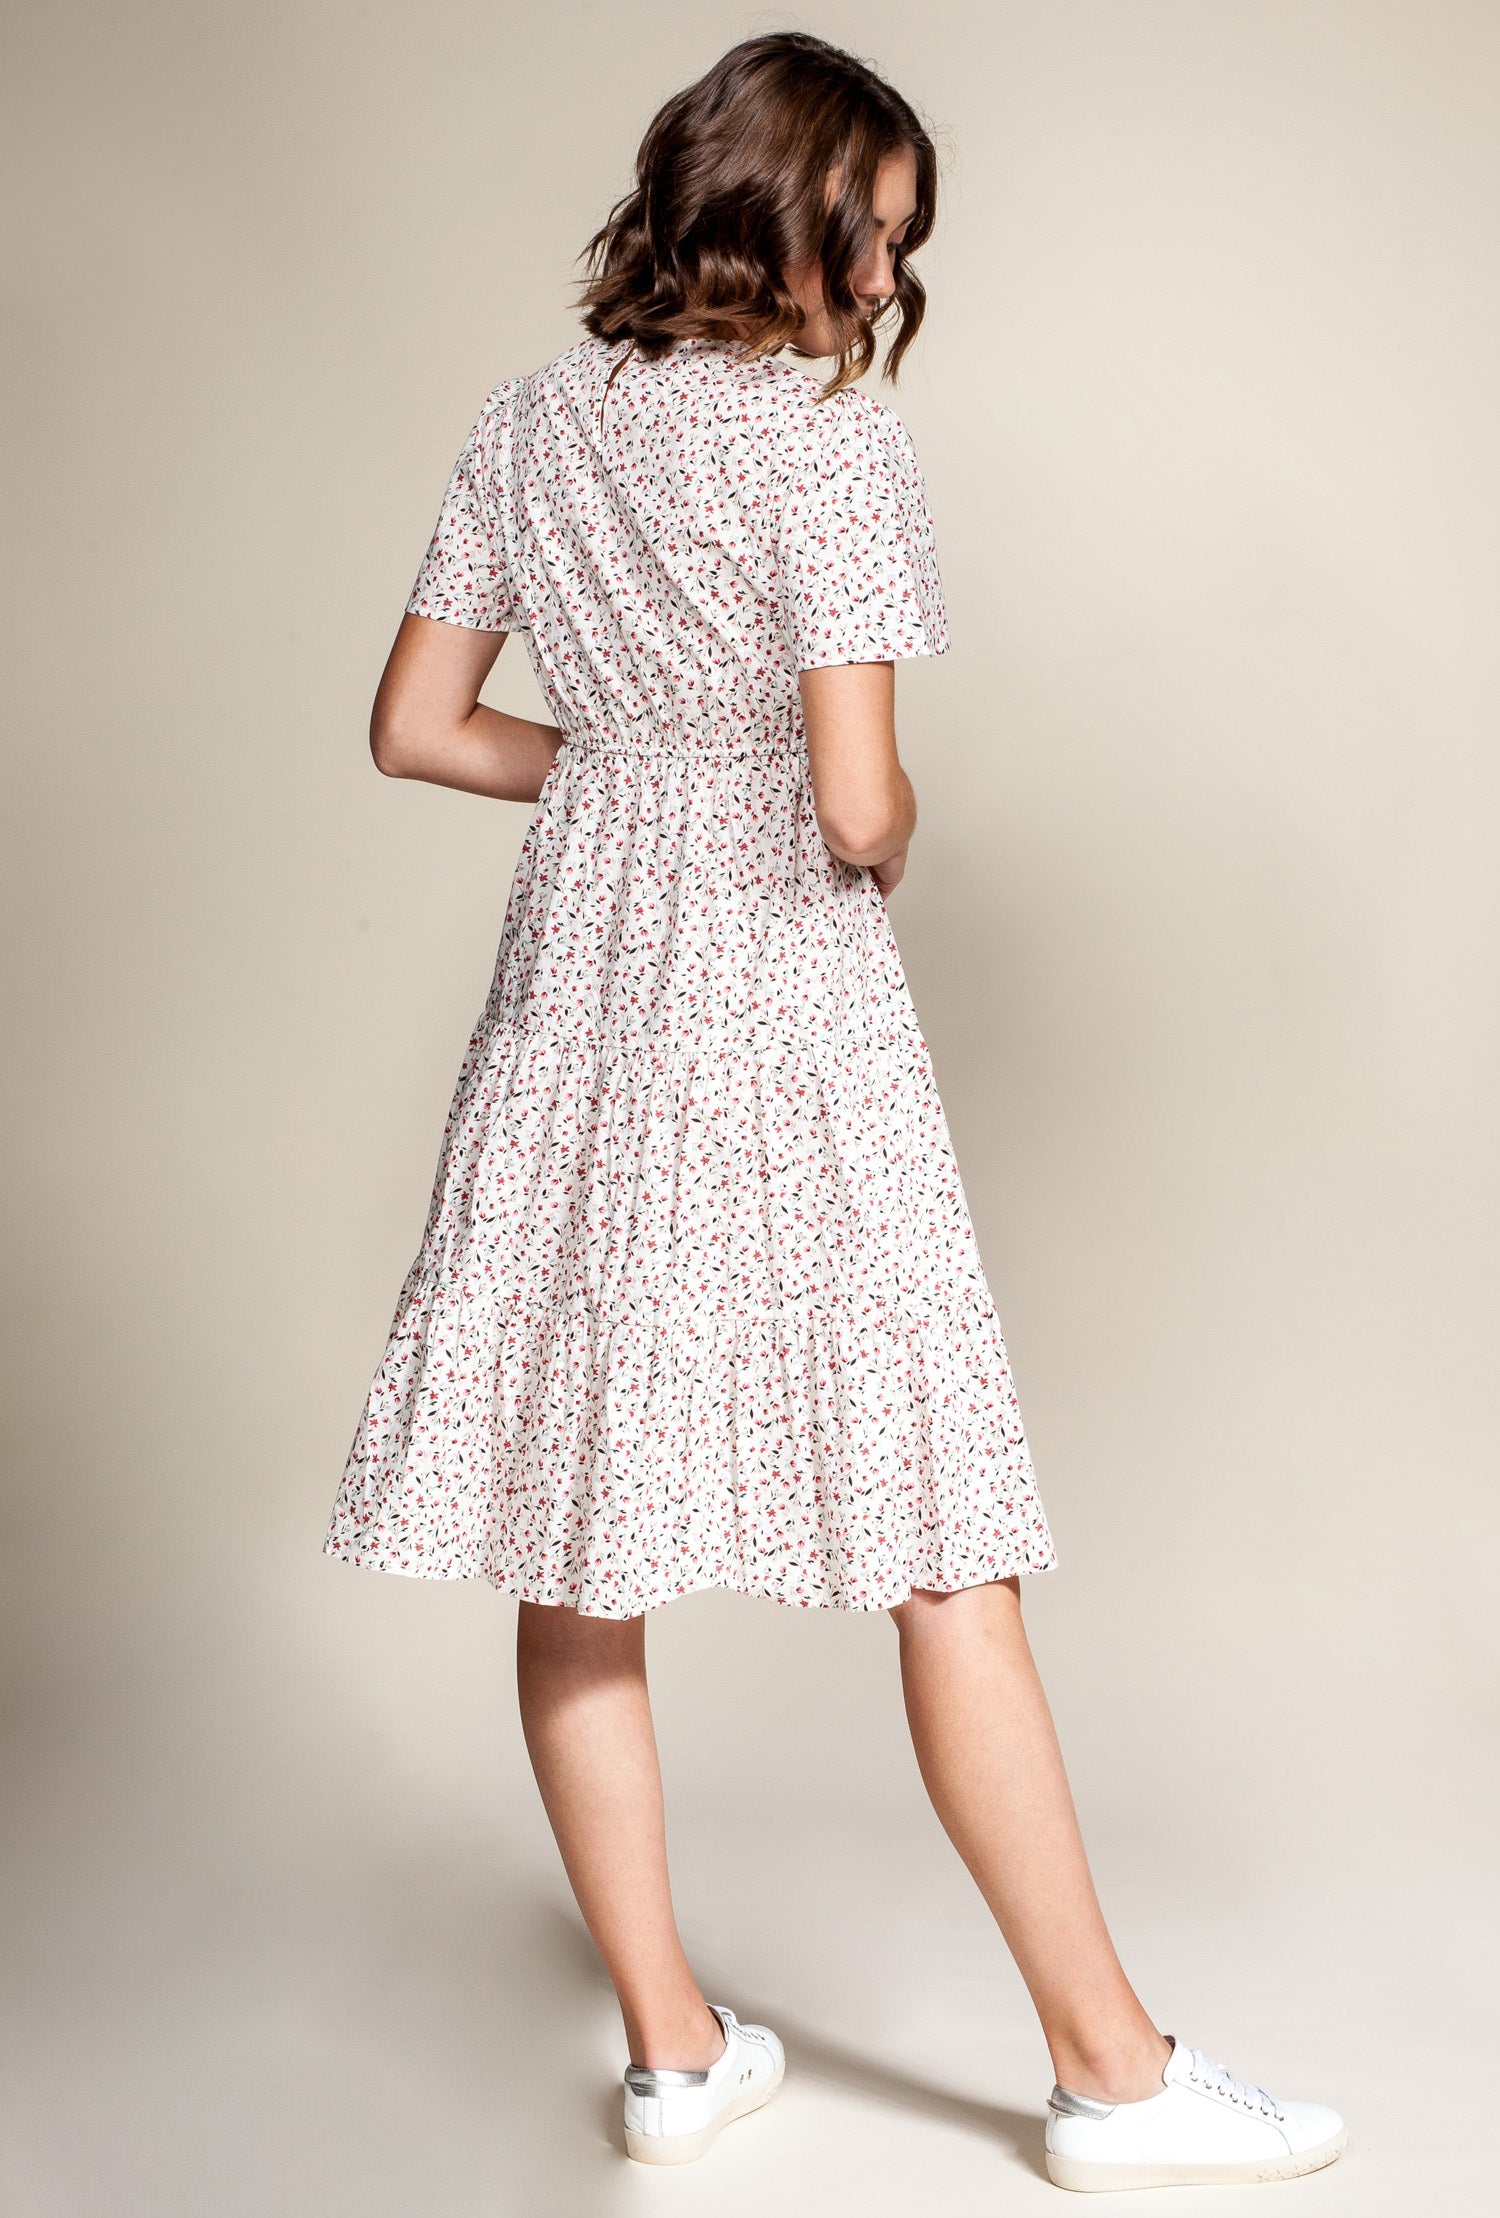 Charlotte Dress White - Pink Martini Collection